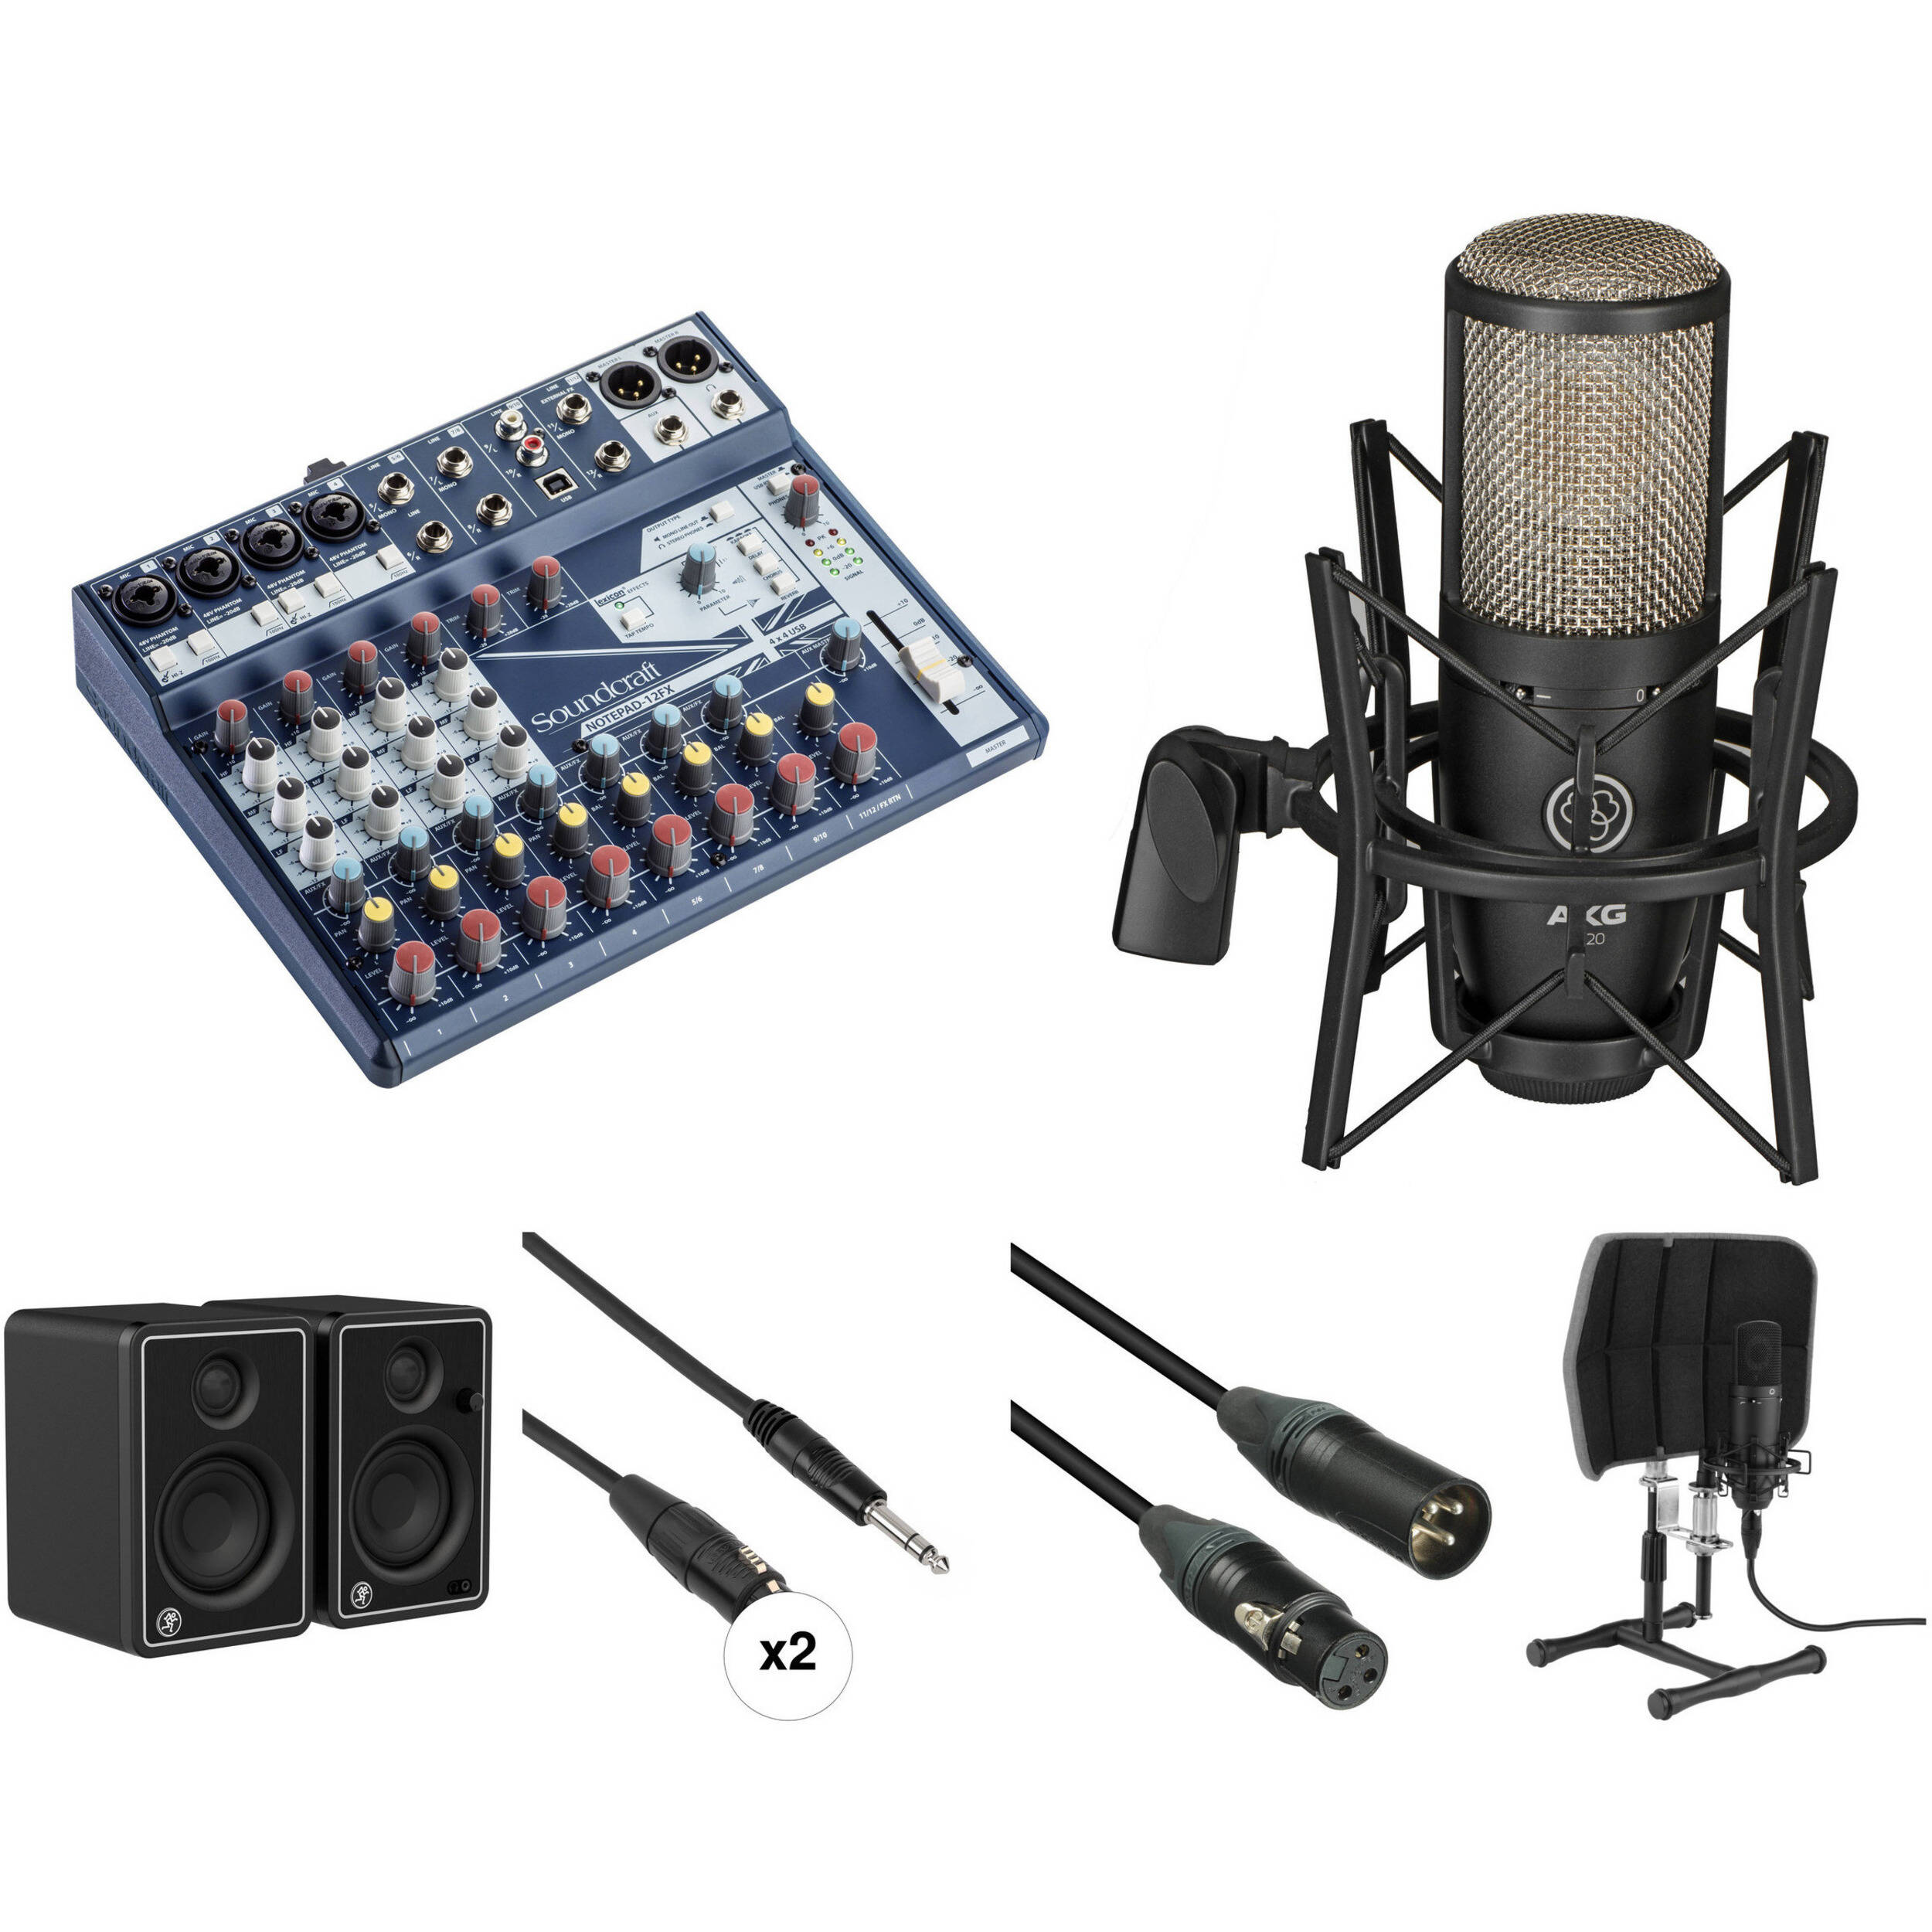 ،　،　Studio　Mixer　Monitors　Radio　One　Stop　Broadcast　و　Soundcraft　TV　Microphone　Equipment　Kit　Recording　Notepad　and　AKG　JBL　Shopping　Uncuco